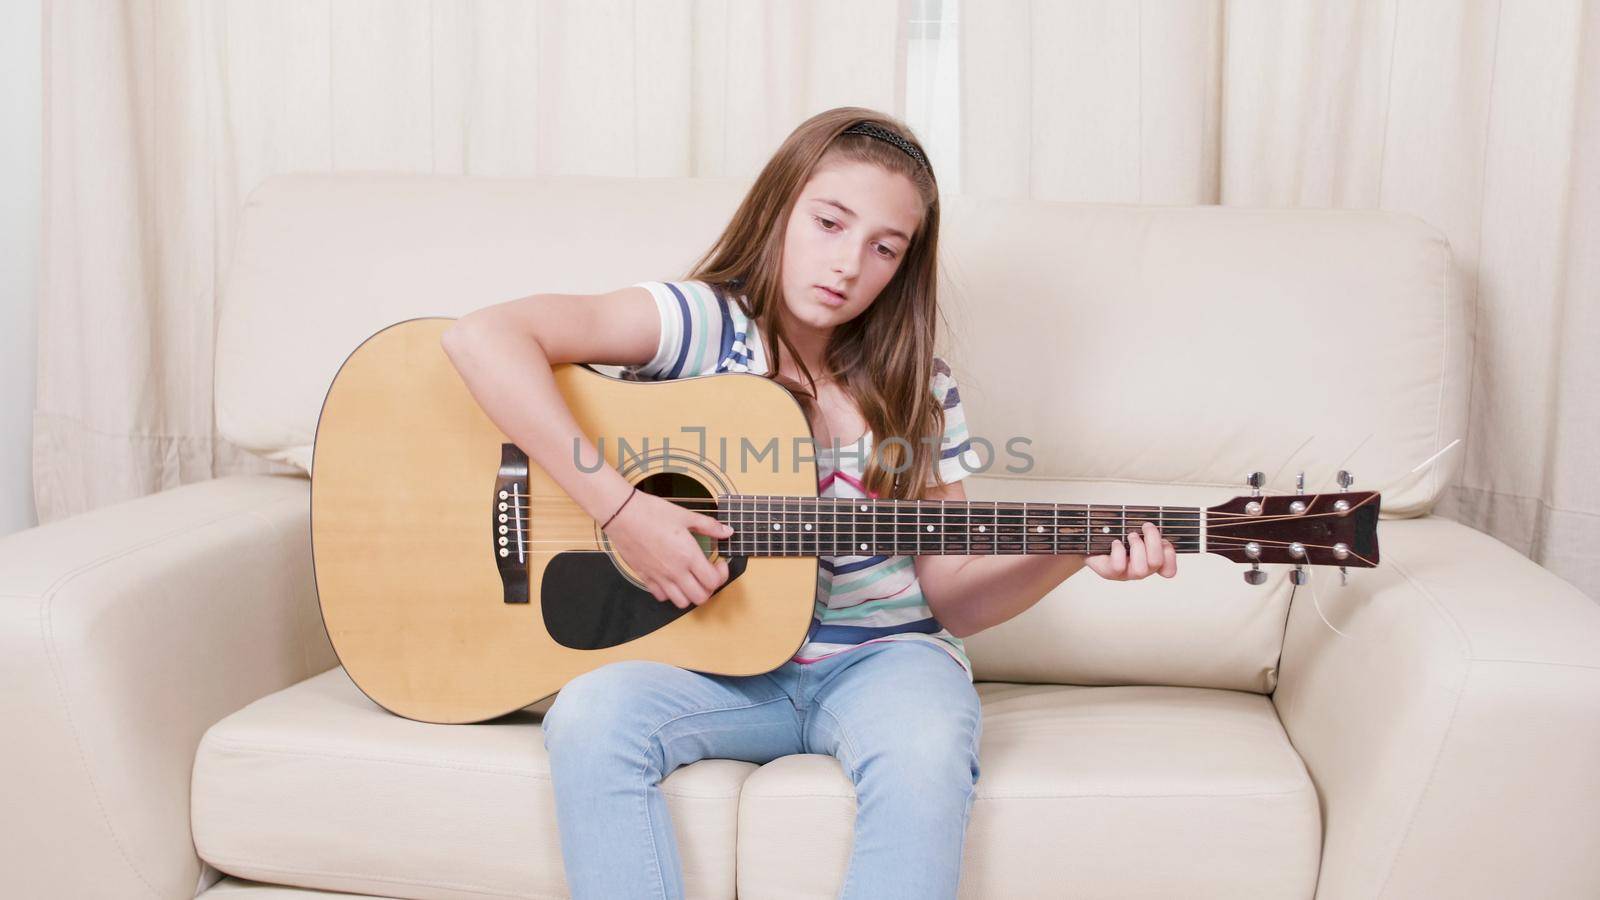 Young guitarist child sitting on sofa holding guitar learning how to sing by DCStudio